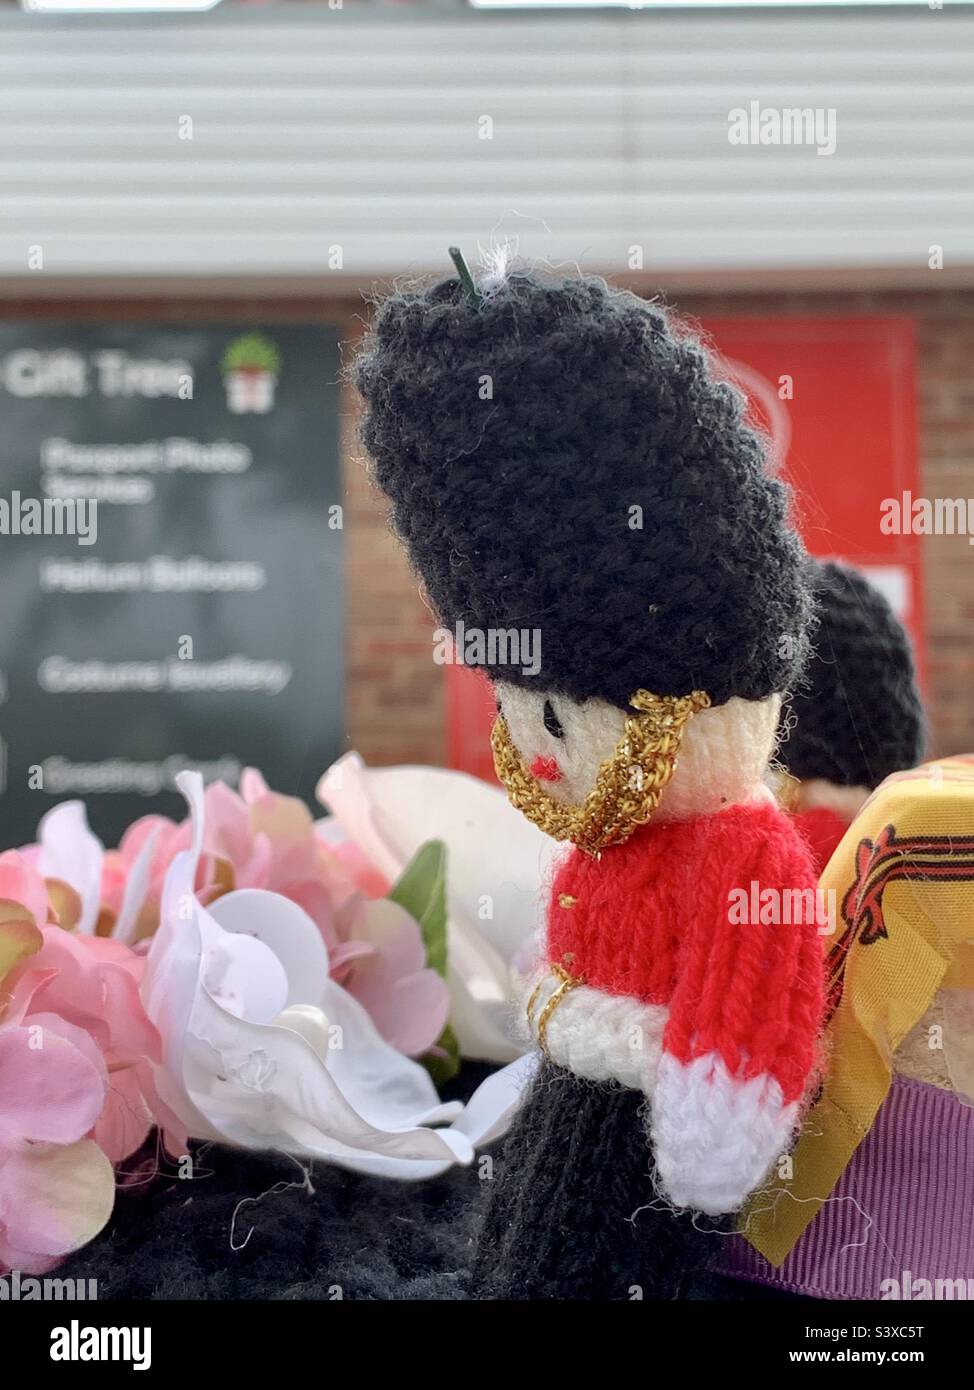 Ipswich, Suffolk, UK - 19 September 2022 : Mourning the death of Queen Elizabeth II. Crochet guardsman with head bowed on a Royal Mail post box. Stock Photo